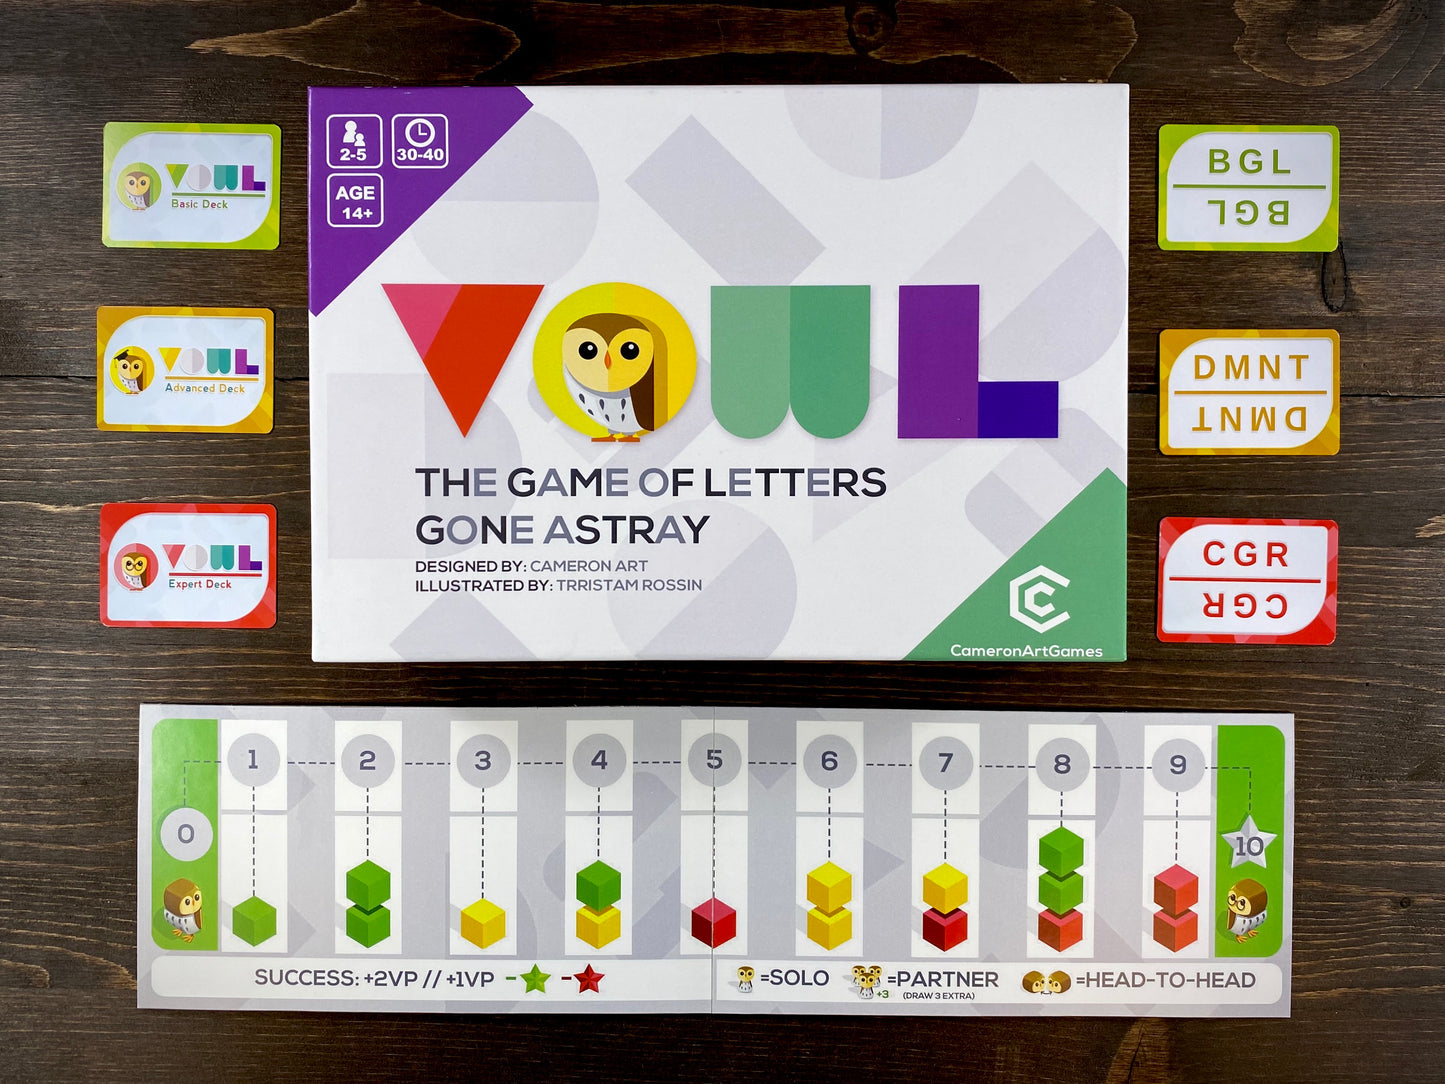 Vowl: The Game of Letters Gone Astray